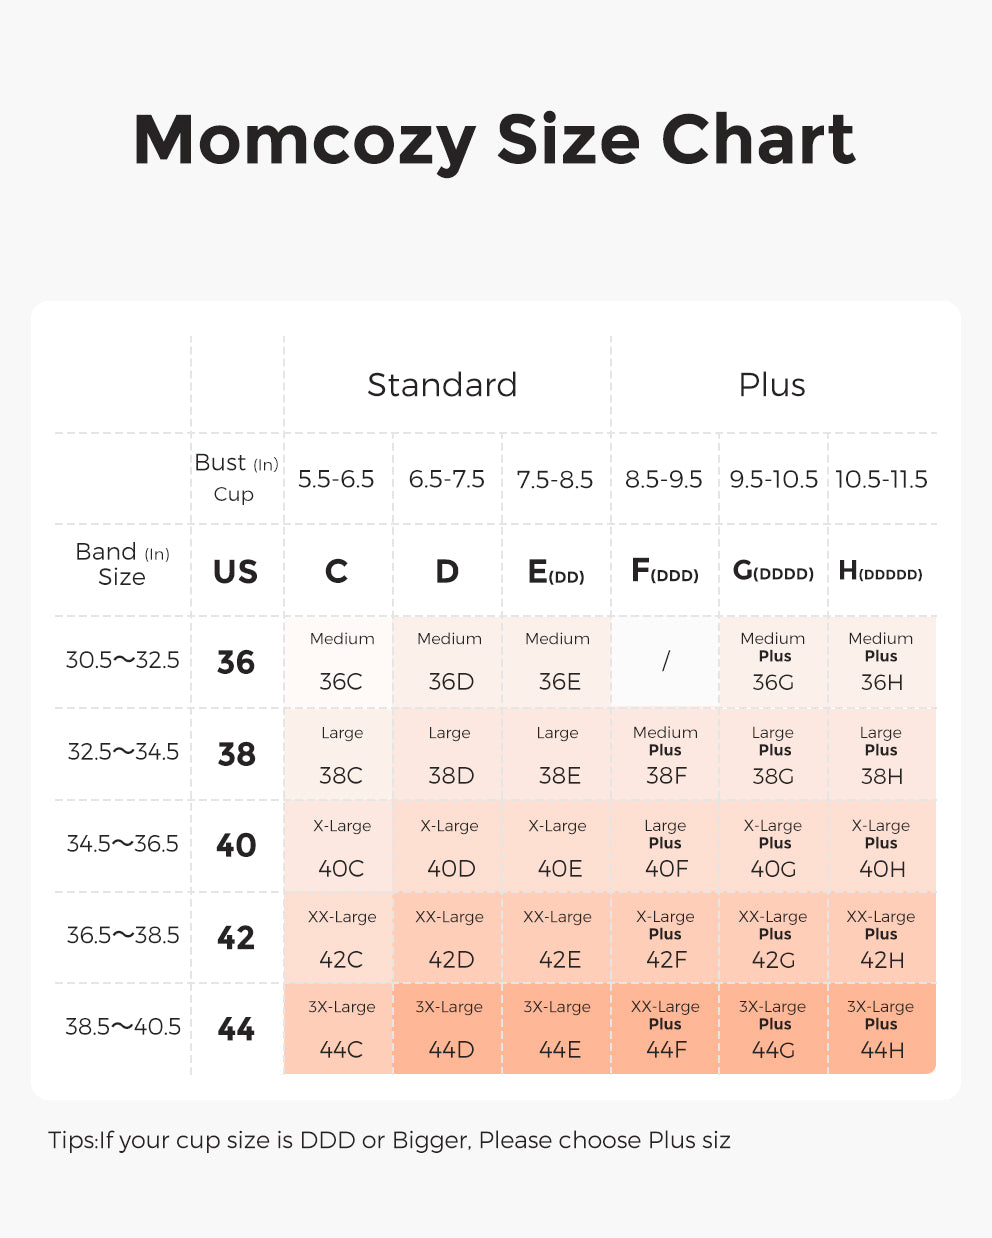 Momcozy size chart for pumping and nursing bras, showing band sizes from 36 to 44 and cup sizes from C to H for both Standard and Plus sizes. Includes tip: 'If your cup size is DDD or Bigger, please choose Plus size.'